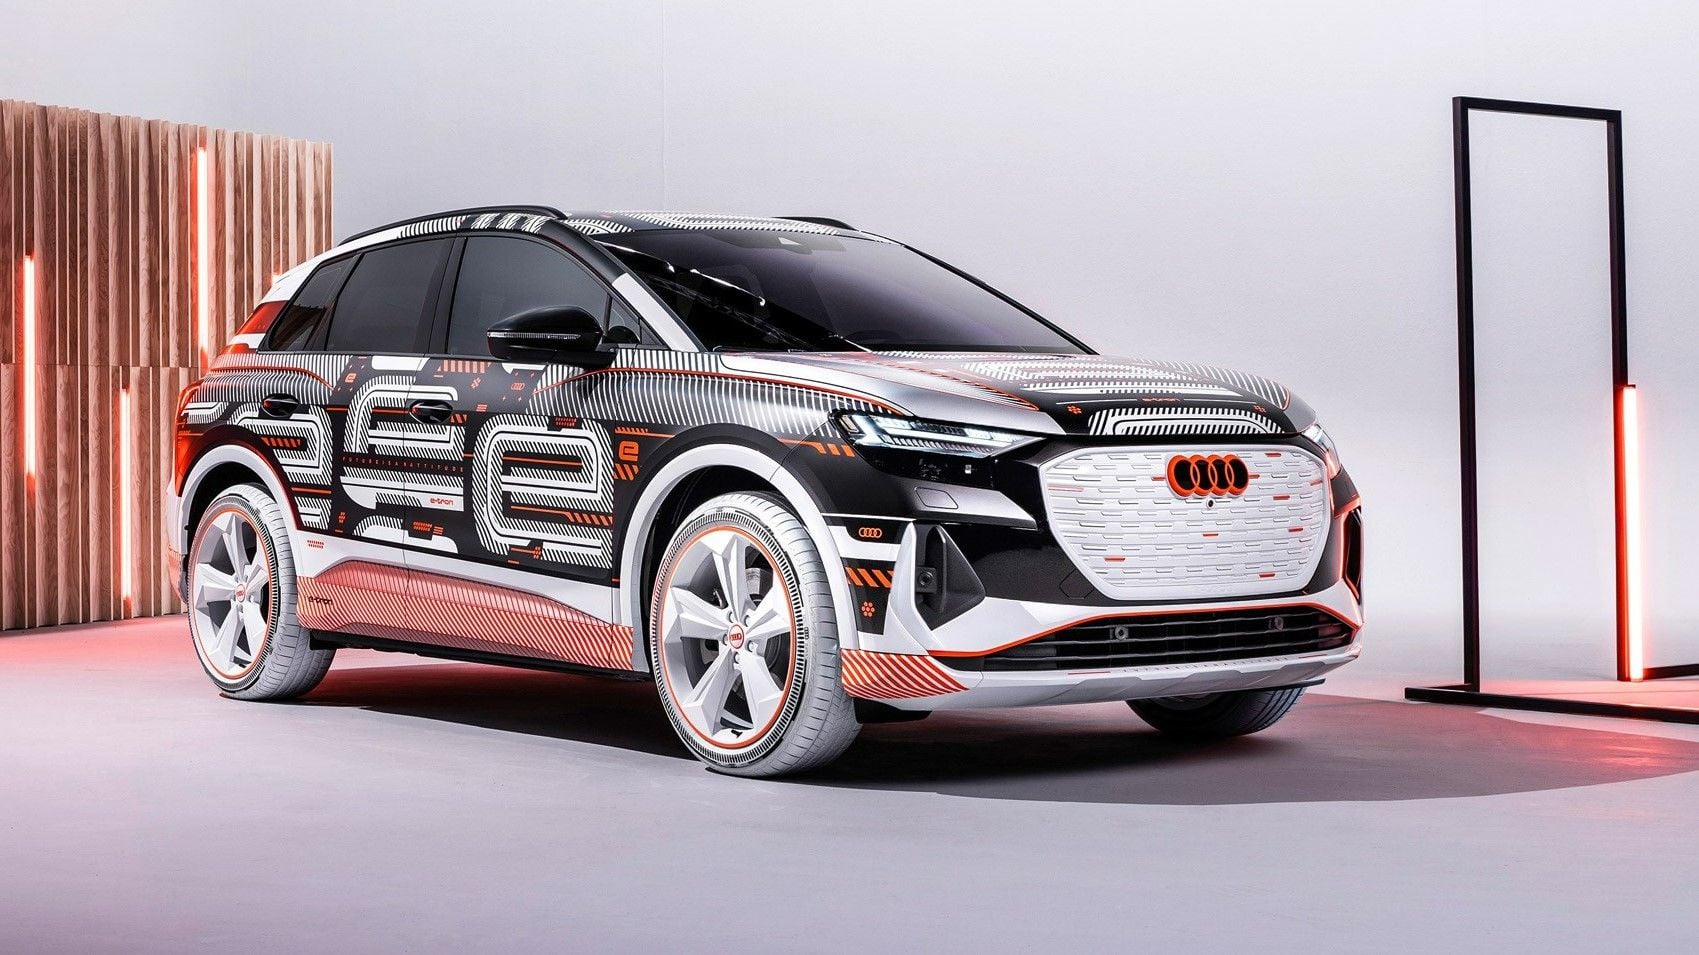 New Q4 e-Tron is First MEB Based Audi | Audiworld